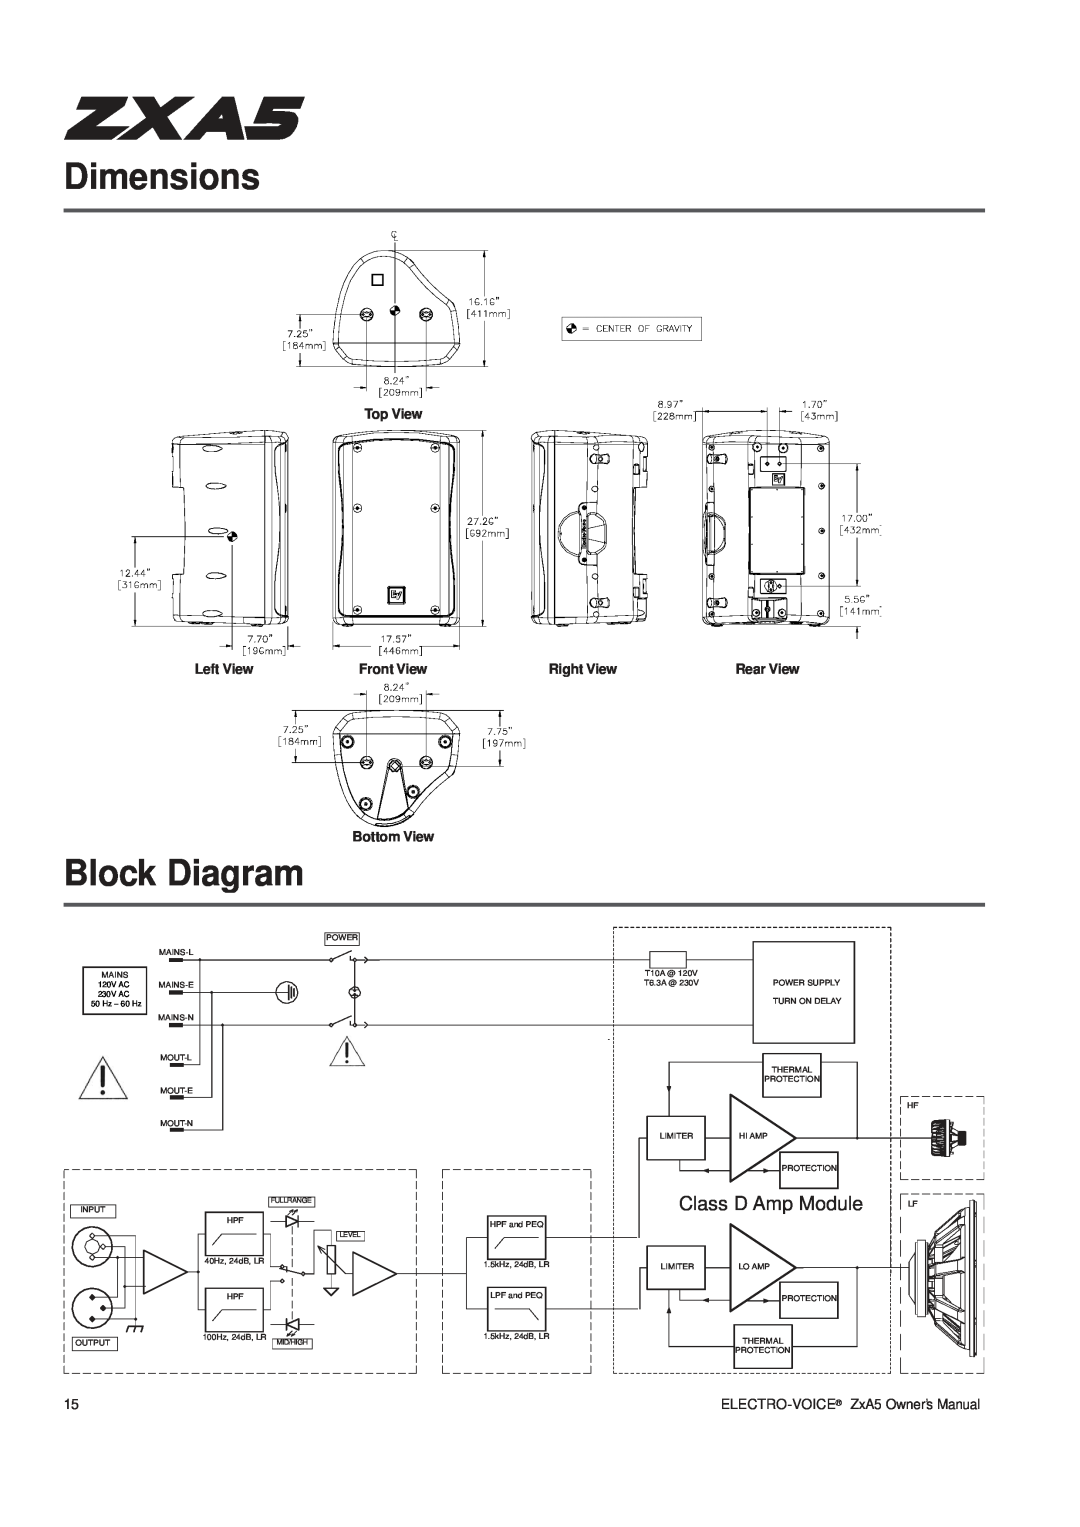 Pentax ZXA5-60 Dimensions, Block Diagram, Class D Amp Module, Top View, Left View, Front View, Right View, Bottom View 